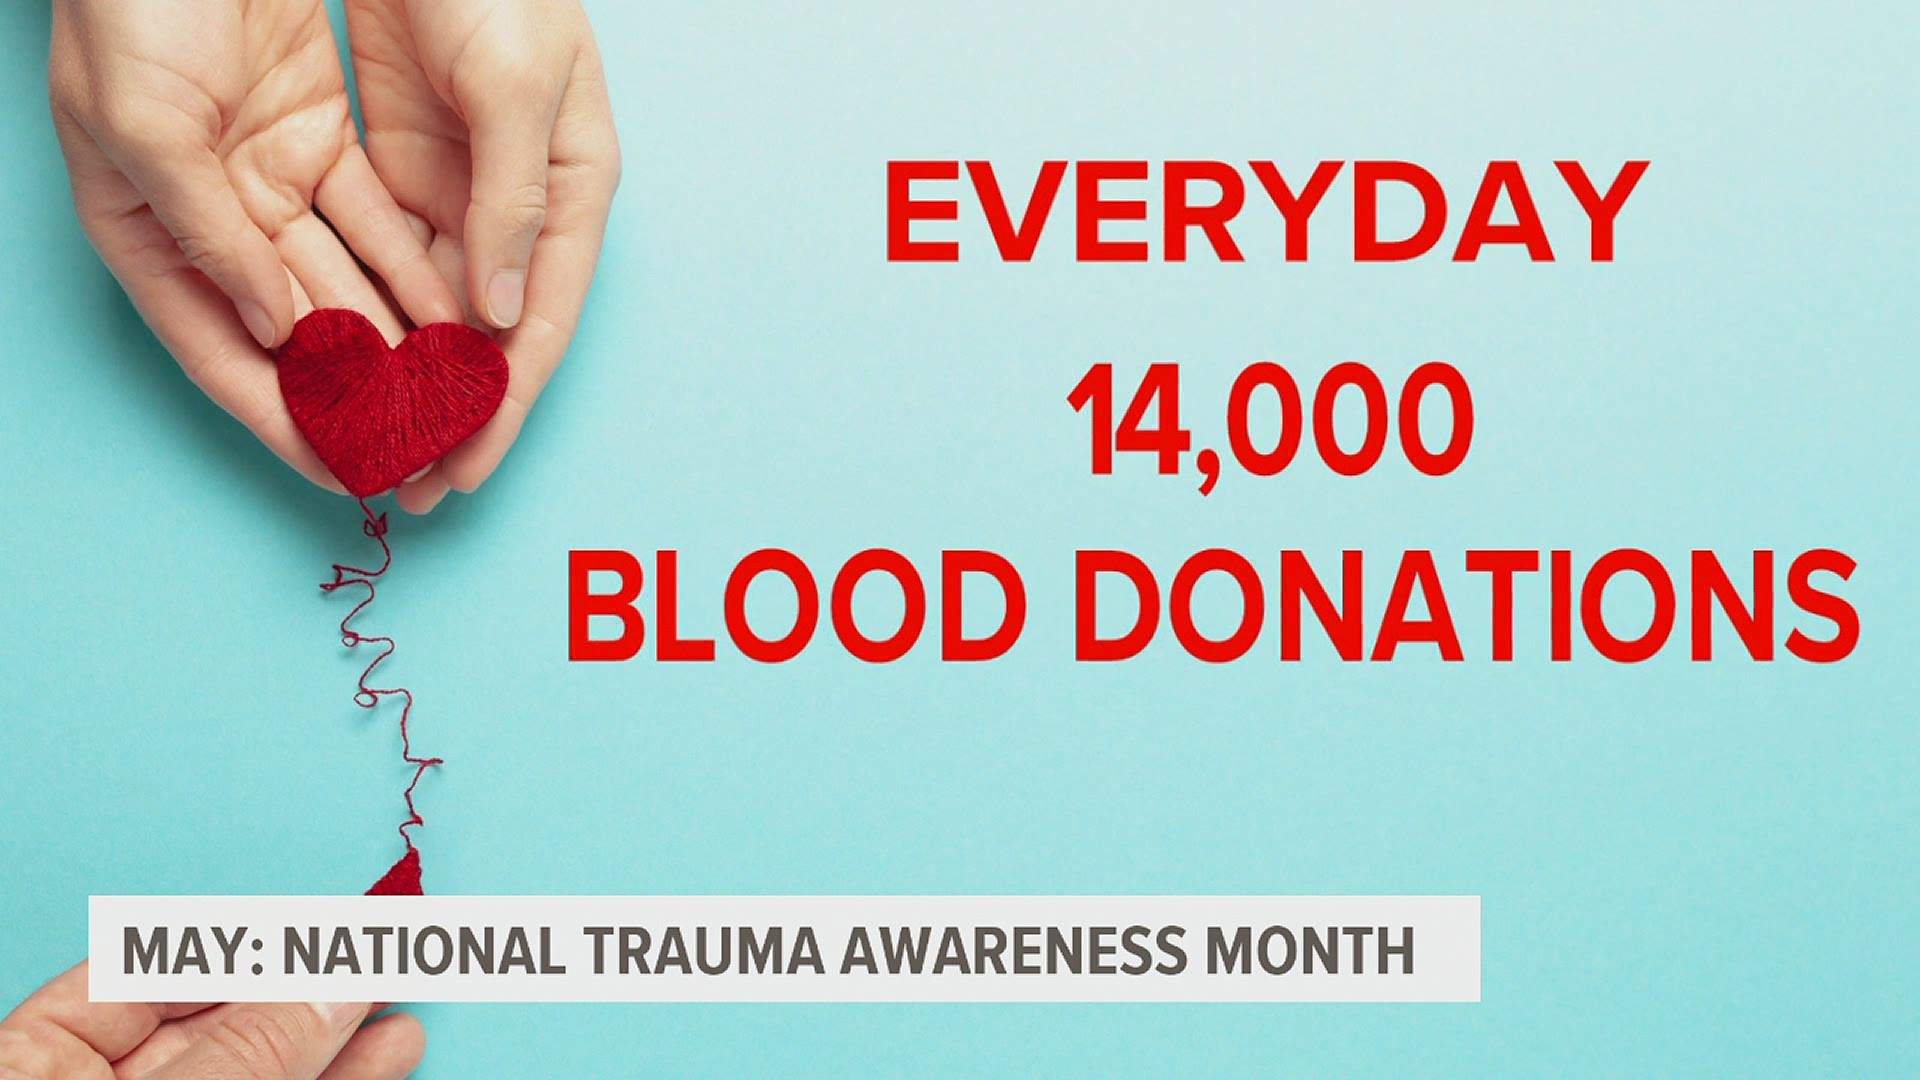 How to make a difference during National Trauma Awareness Month